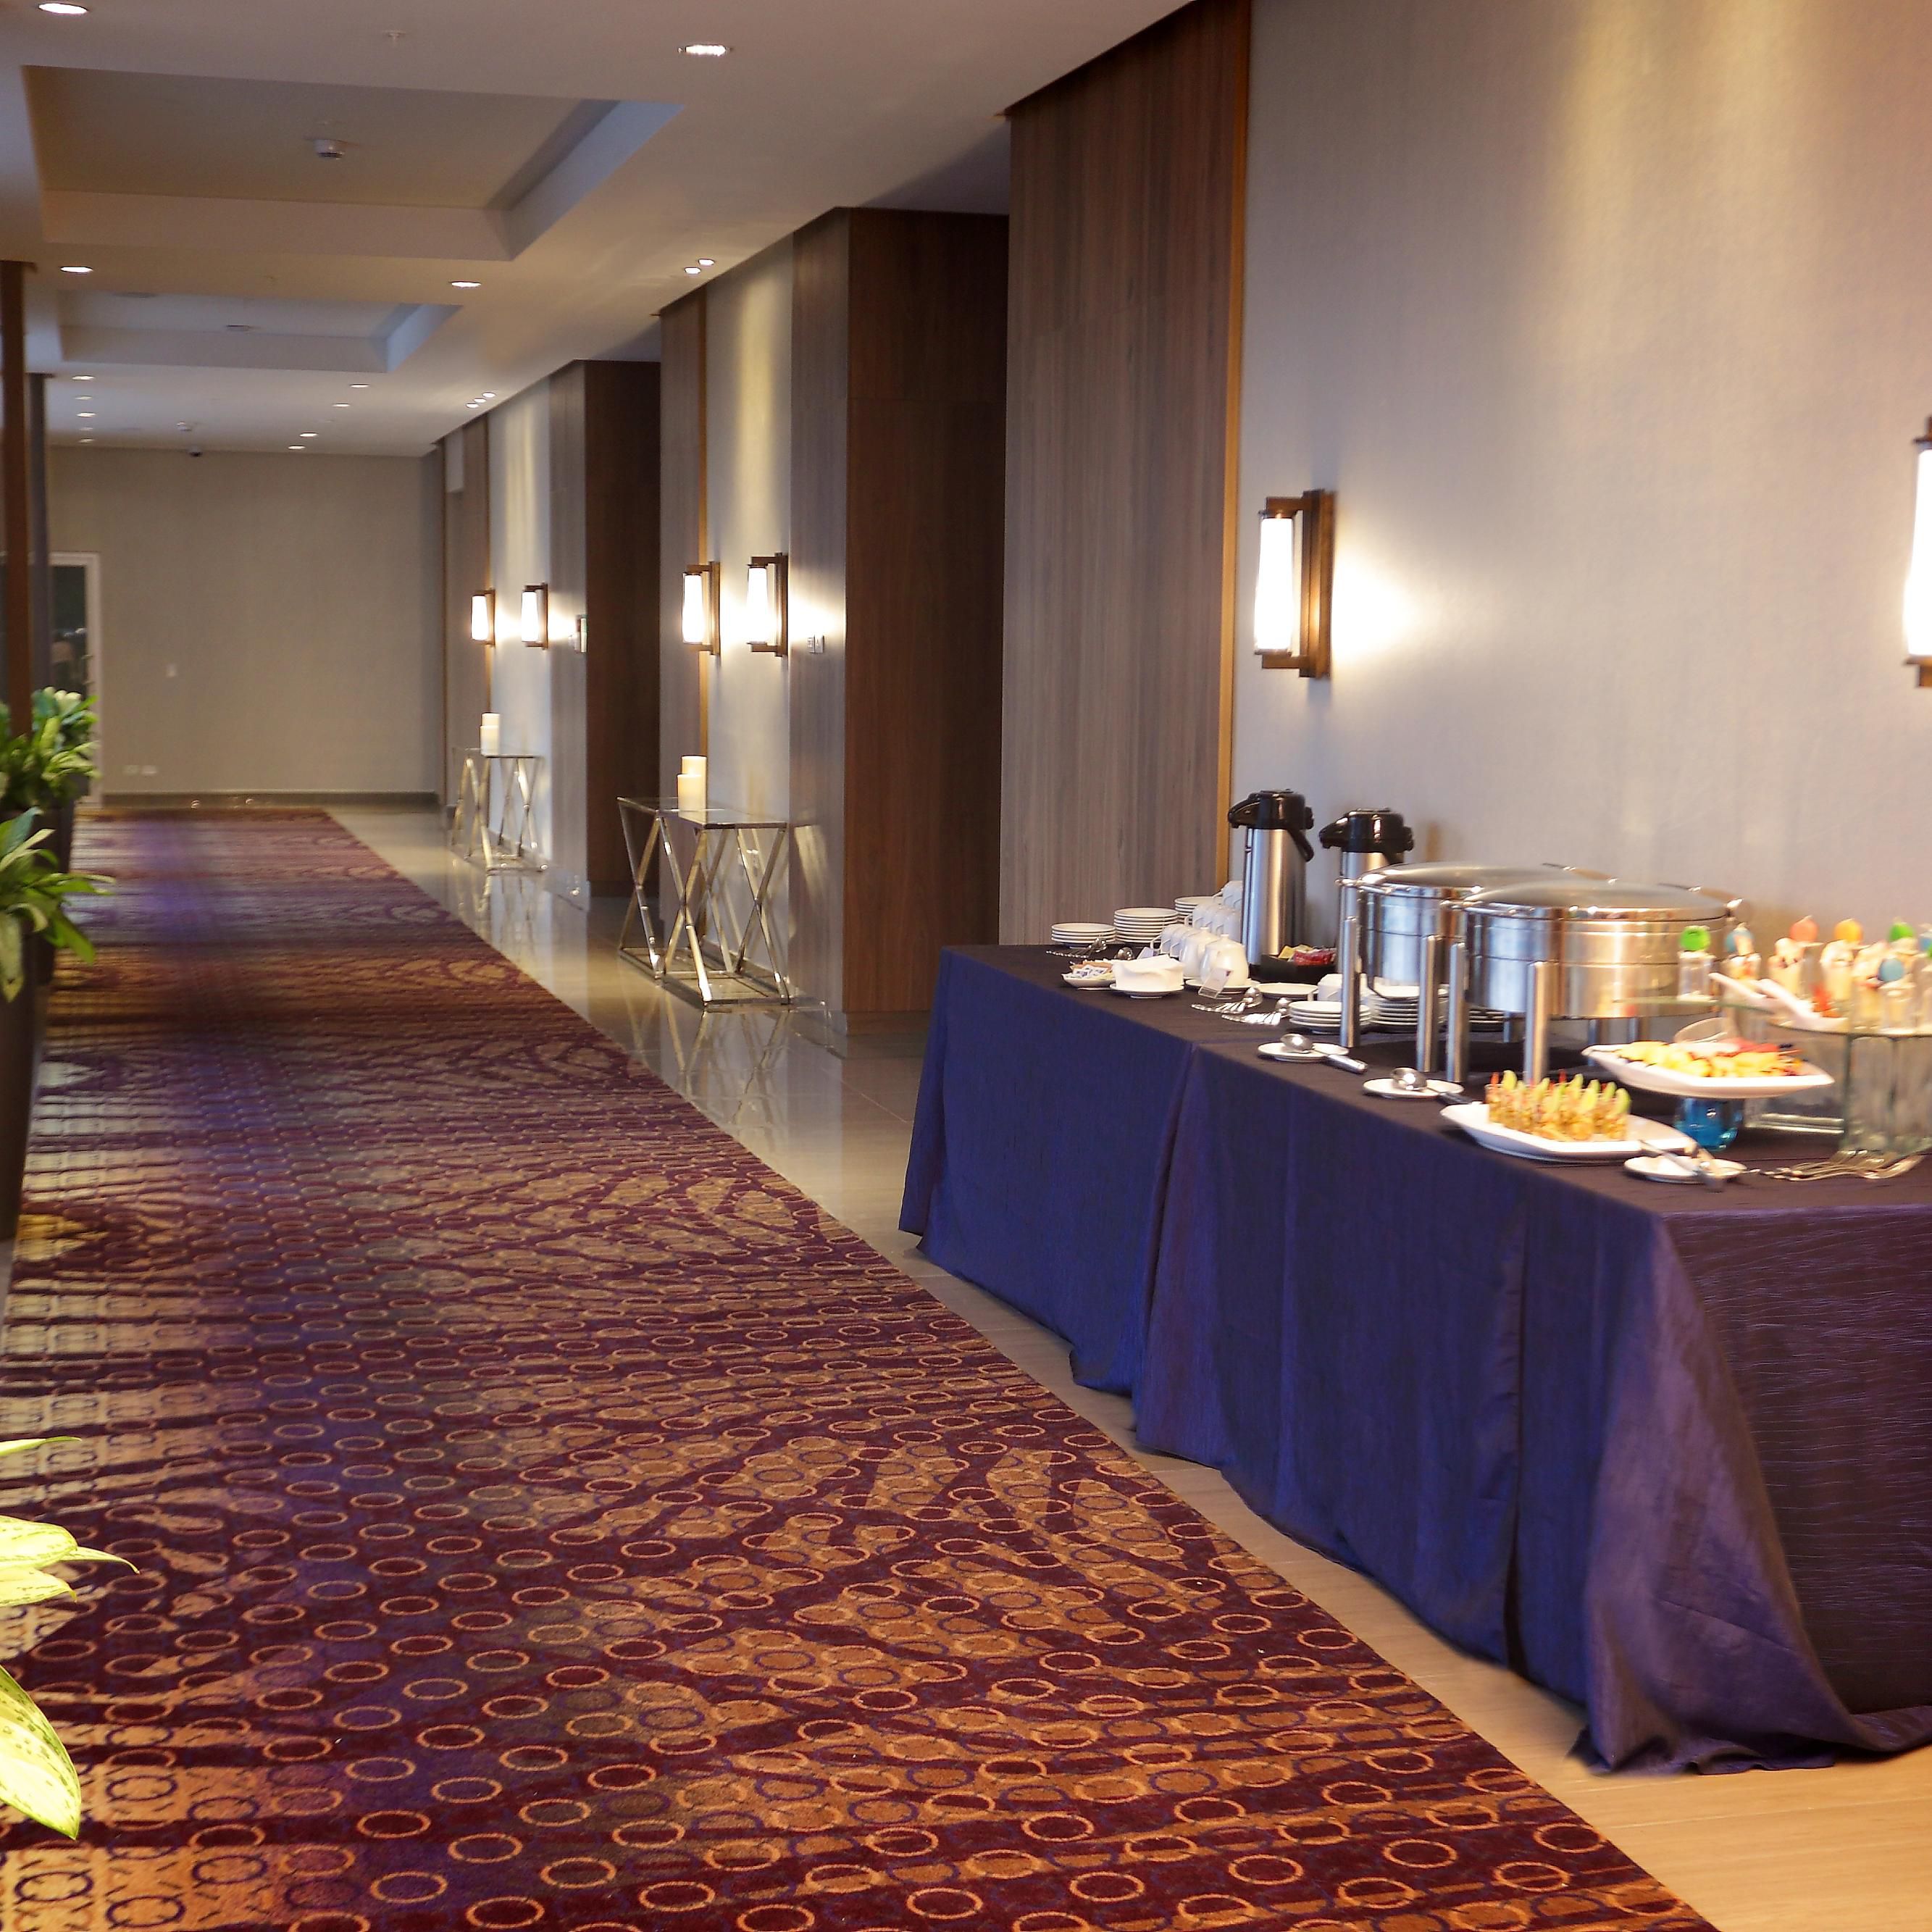 Pre-function Area at the Airport Hotel in Panama, Crowne Plaza PTY